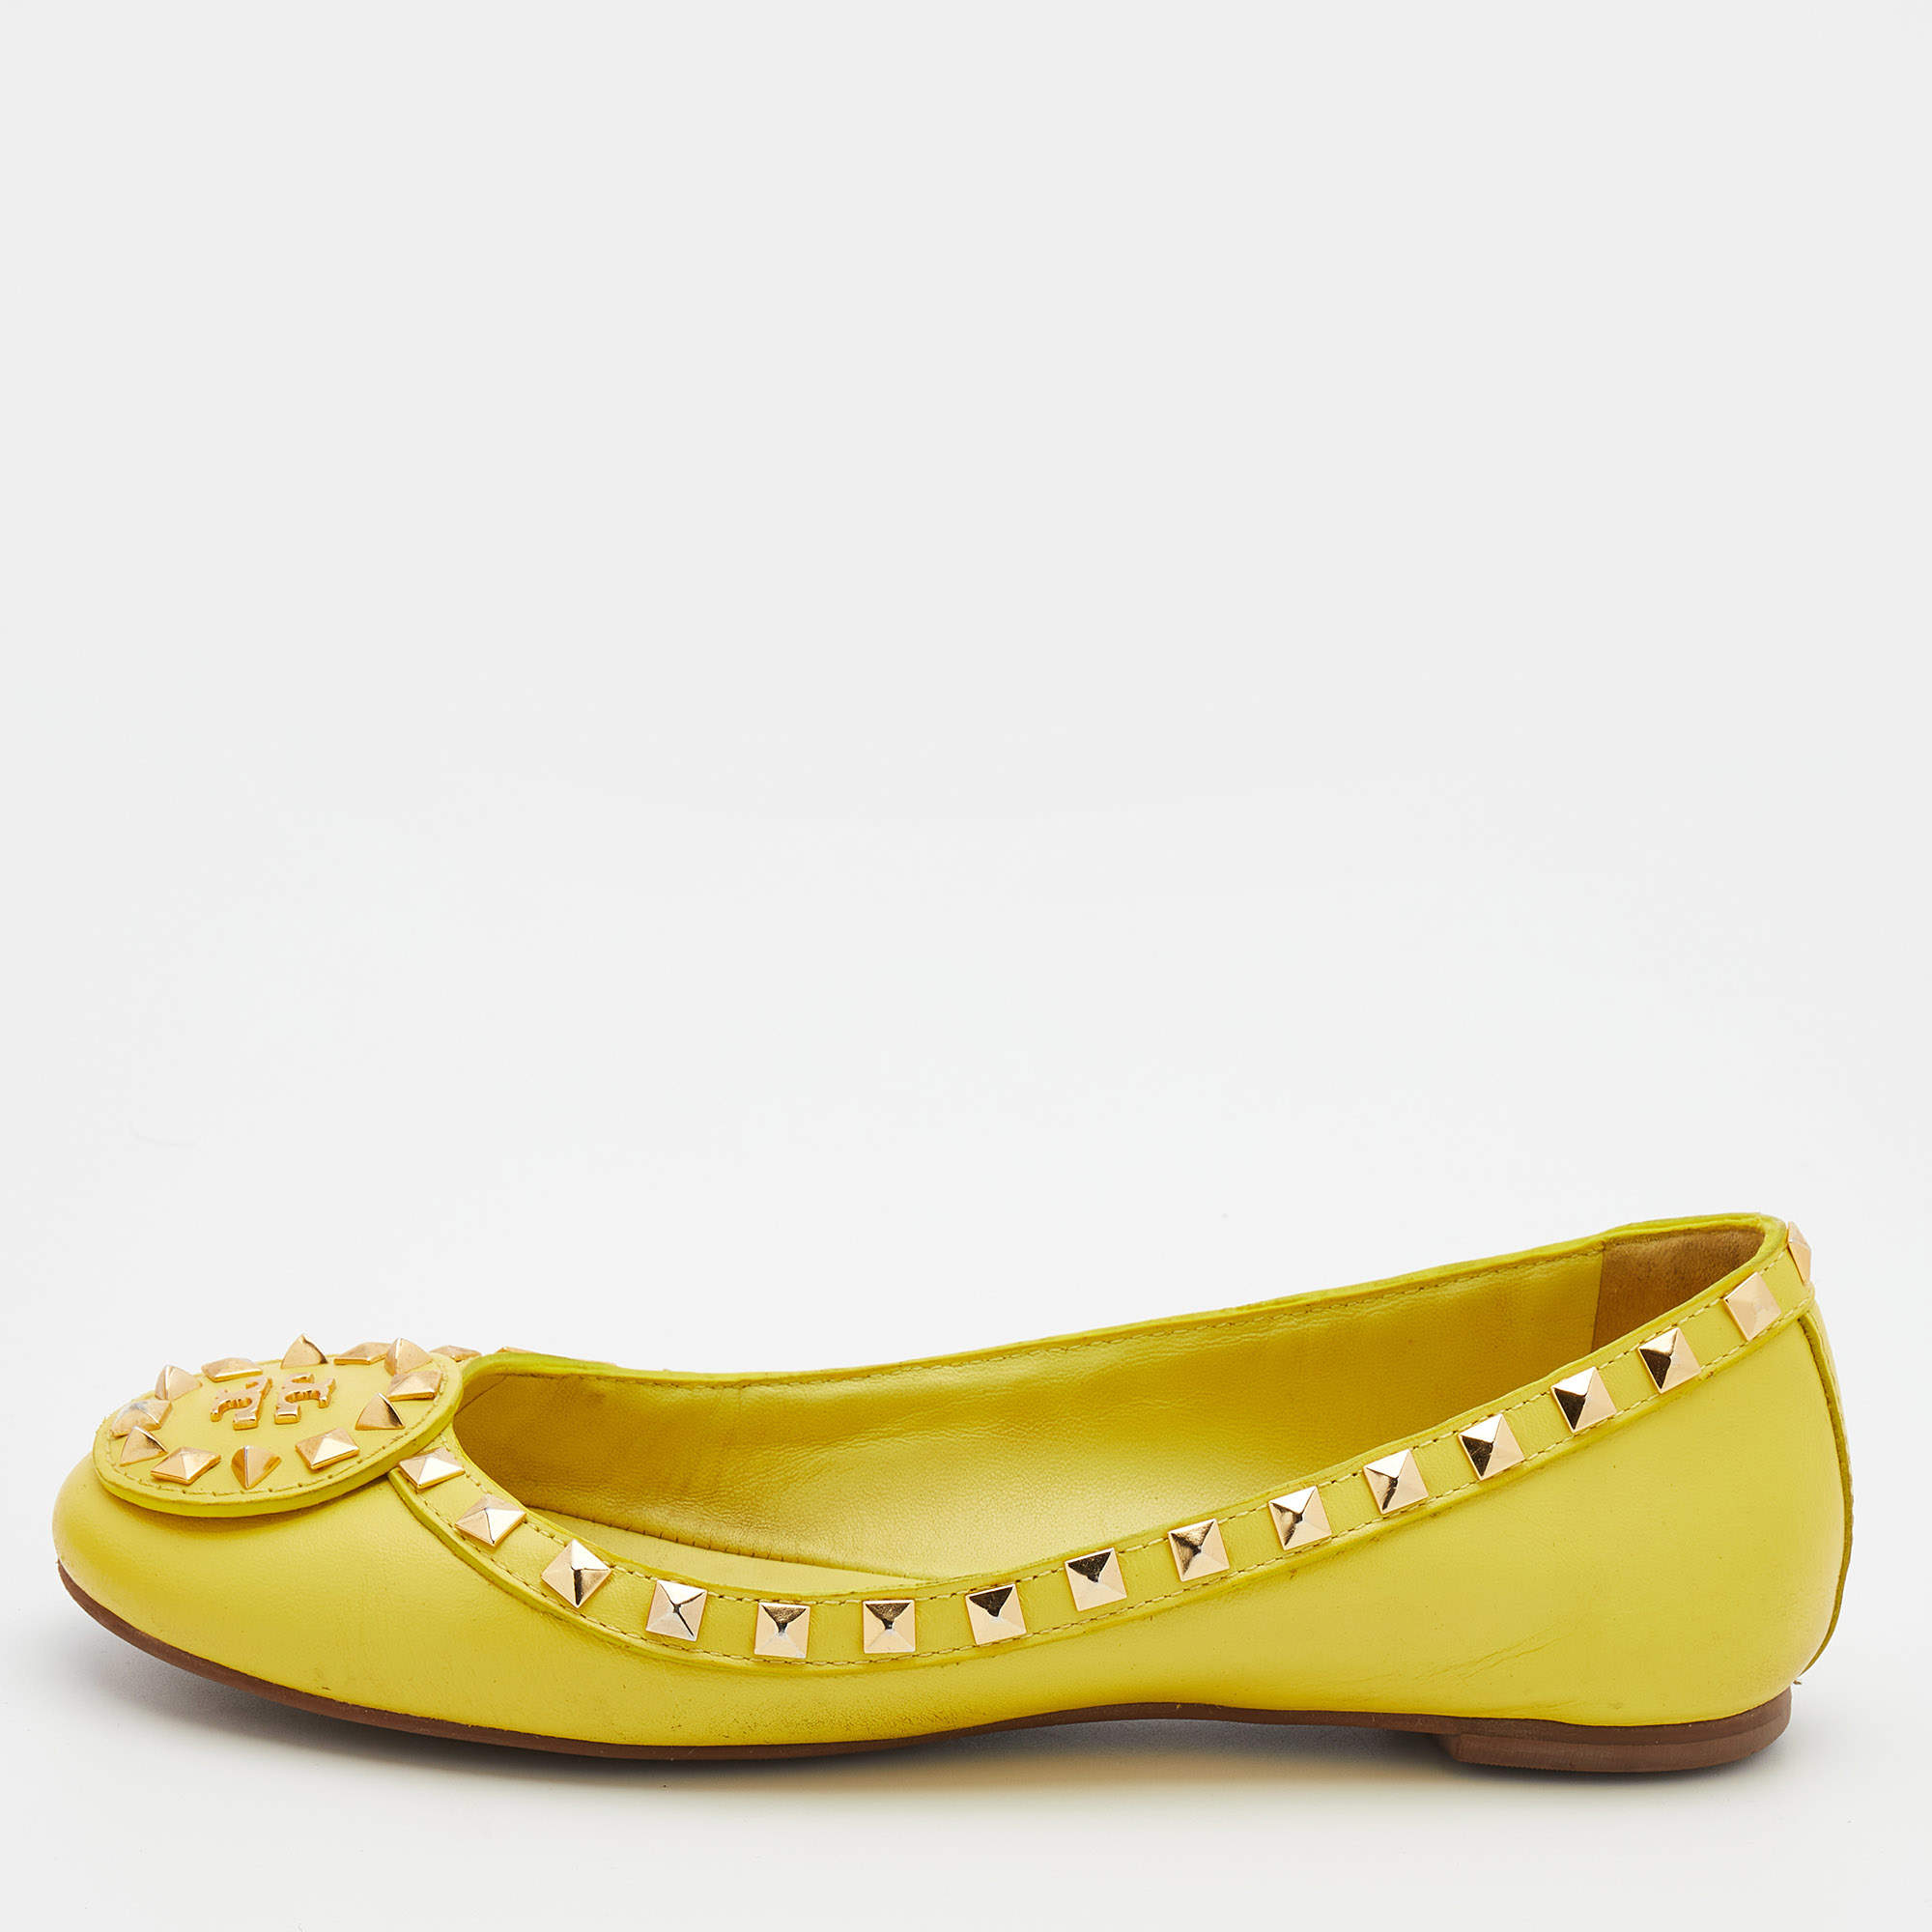 Tory Burch Yellow Leather Studded Ballet Flats Size  Tory Burch | TLC